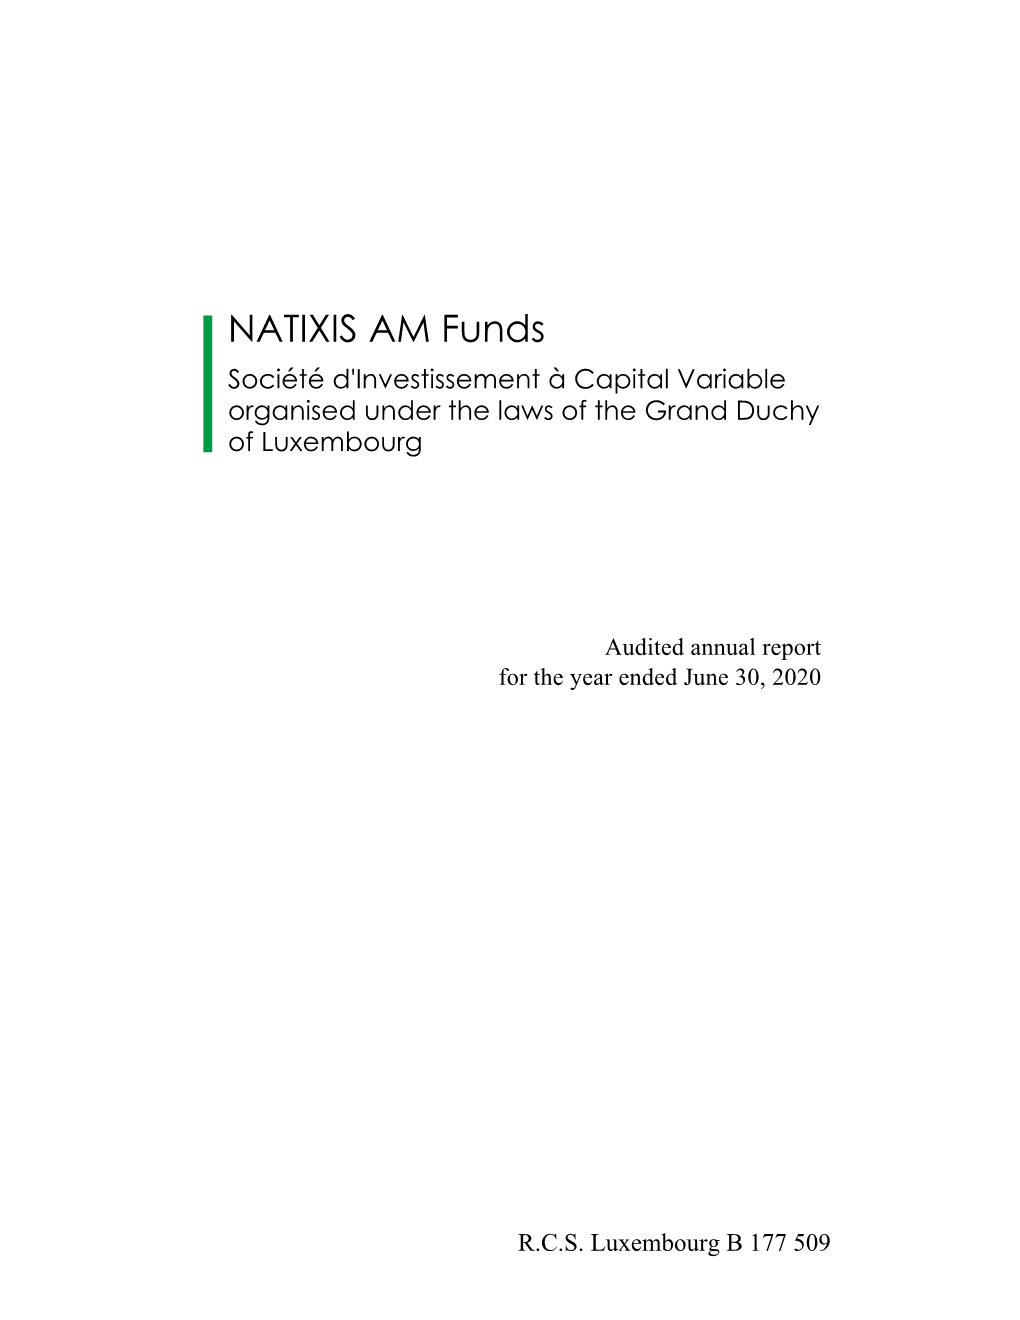 NATIXIS AM Funds